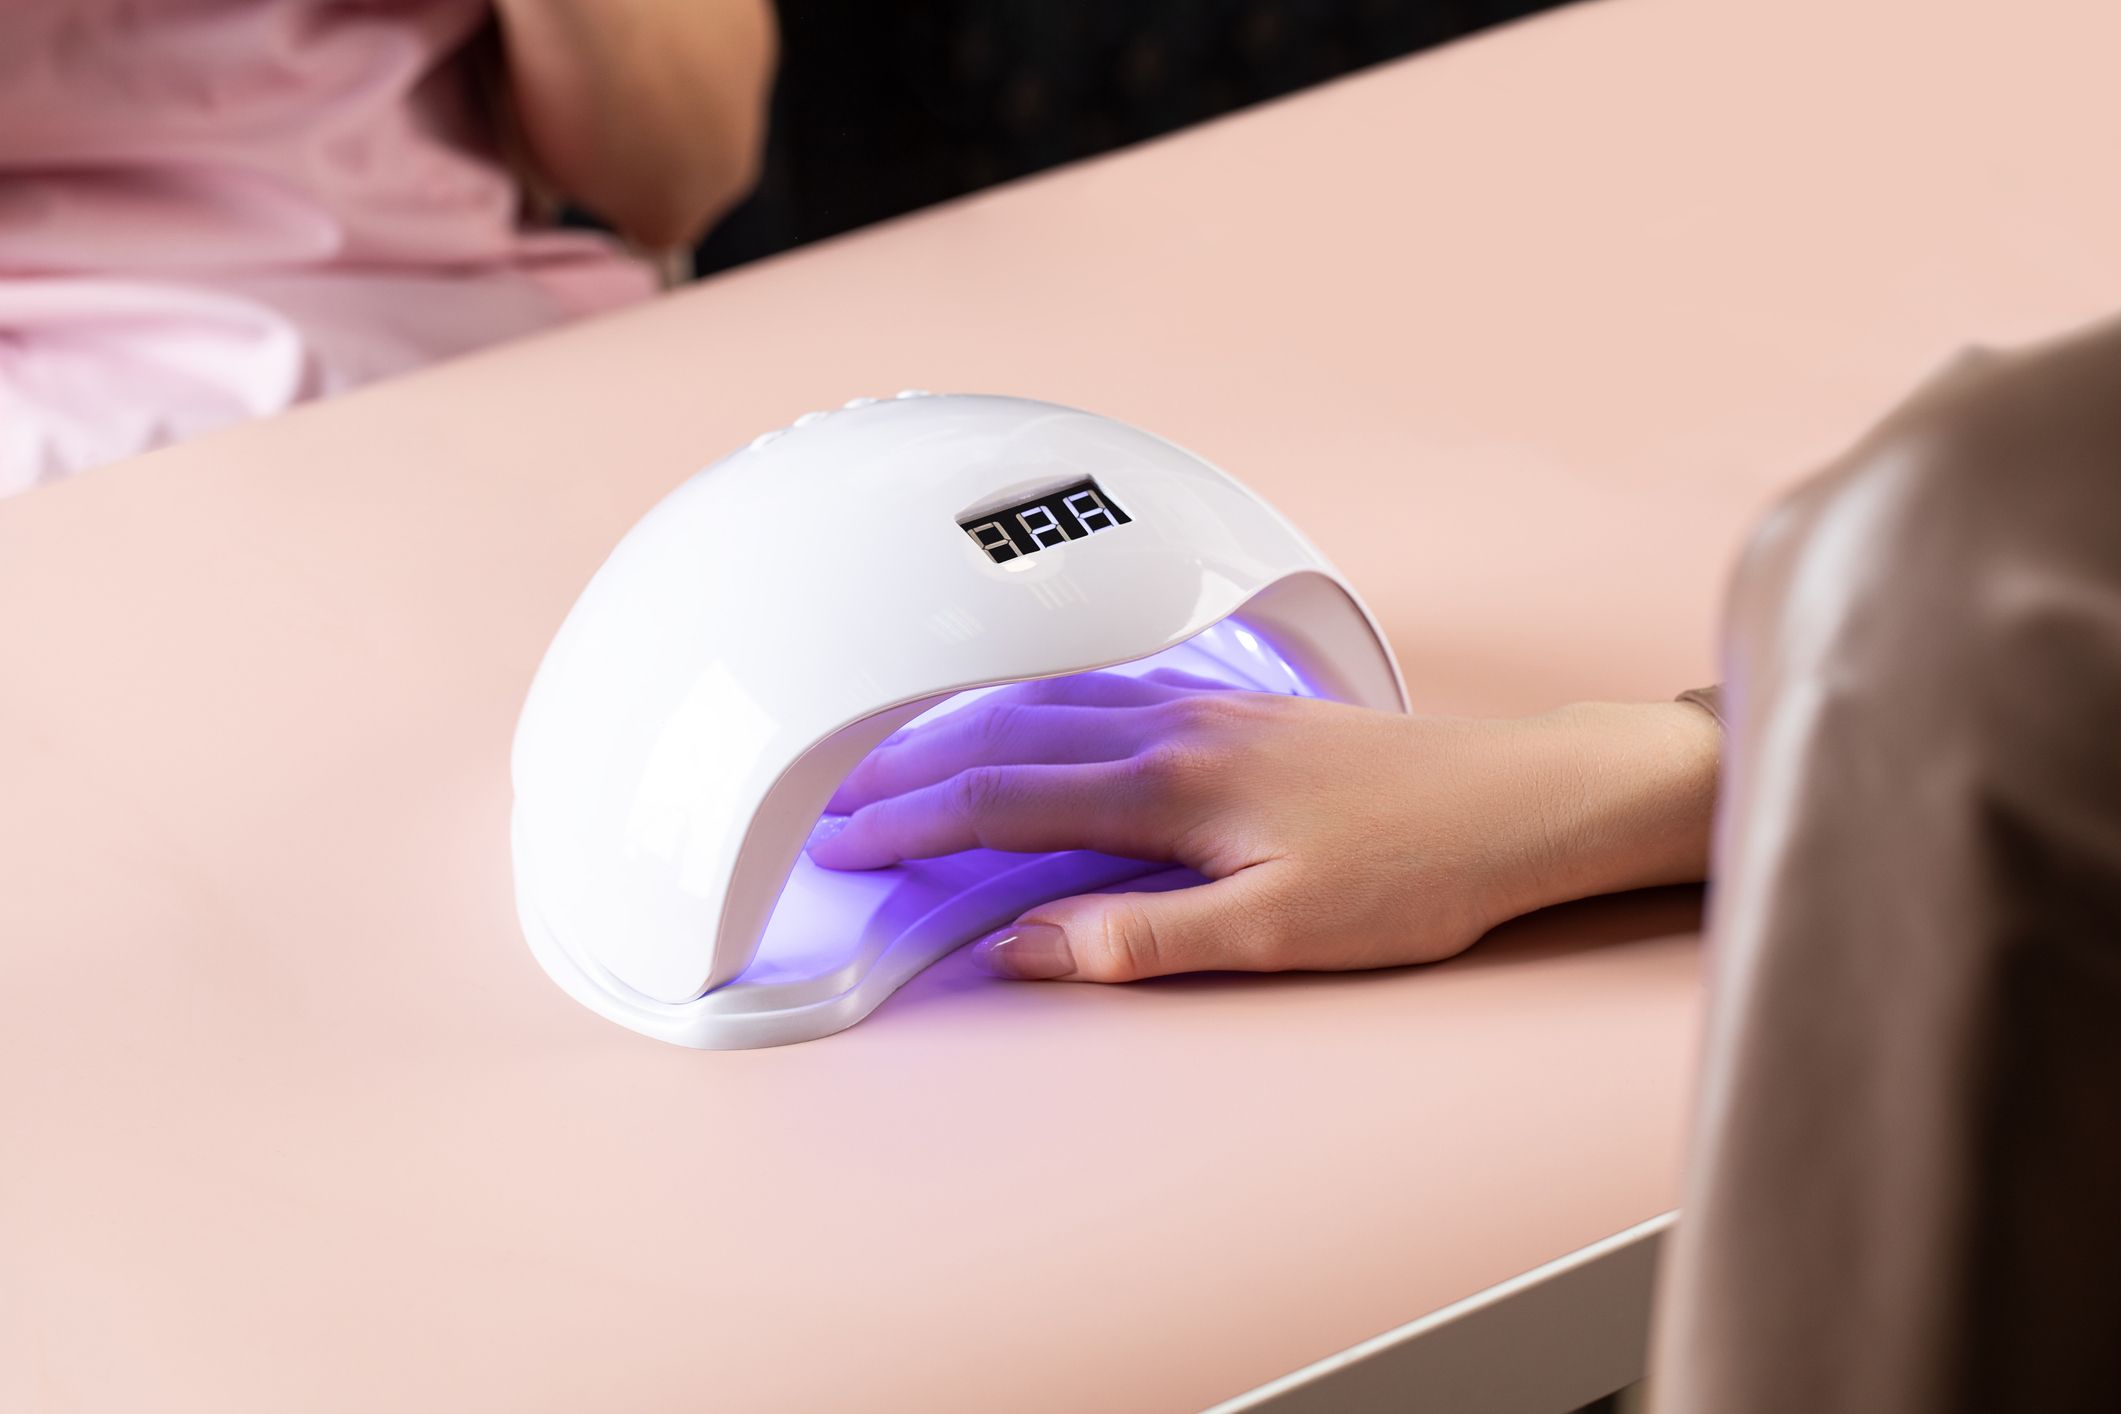 UV nail dryers used in gel manicures may increase skin cancer risk study  finds  CBS News